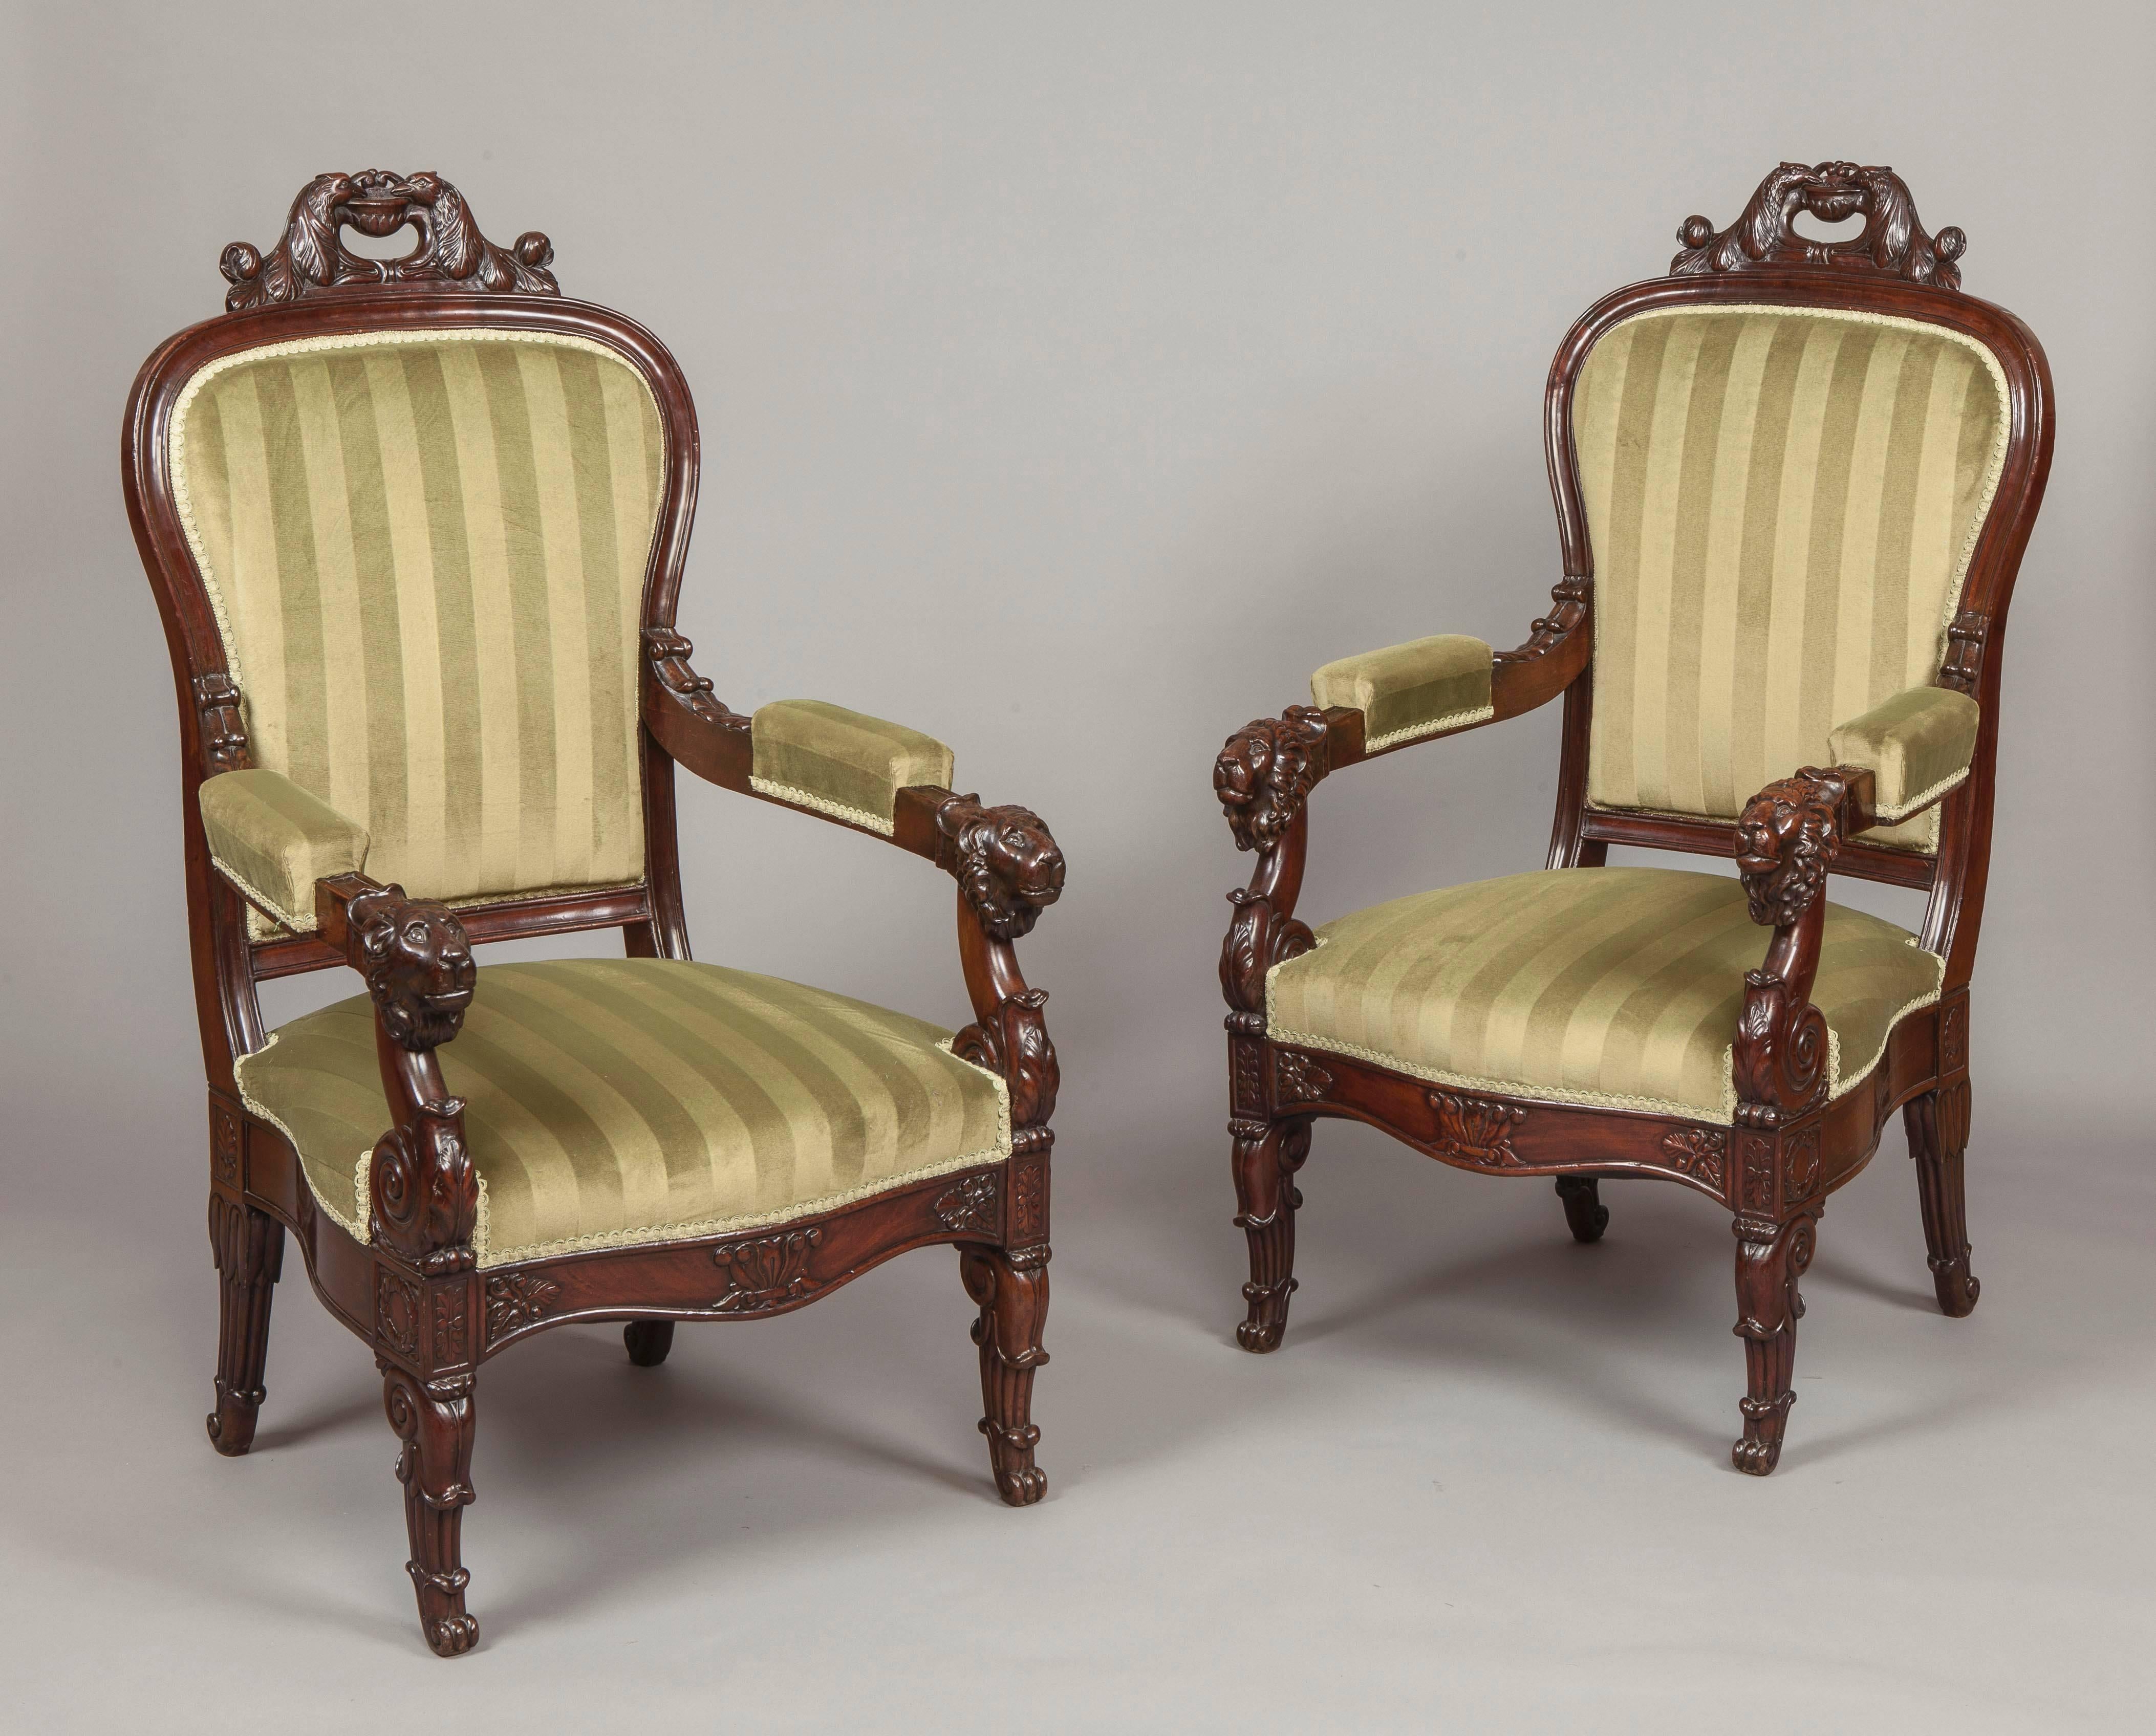 An Imposing Pair of Louis Philippe Fauteuils

Constructed in Honduras mahogany, standing on swept lappeted gentle 'S' shaped legs to the front, and sabre shaped to the rear, the padded arms, leaf carved, terminate in lions heads. The balloon form